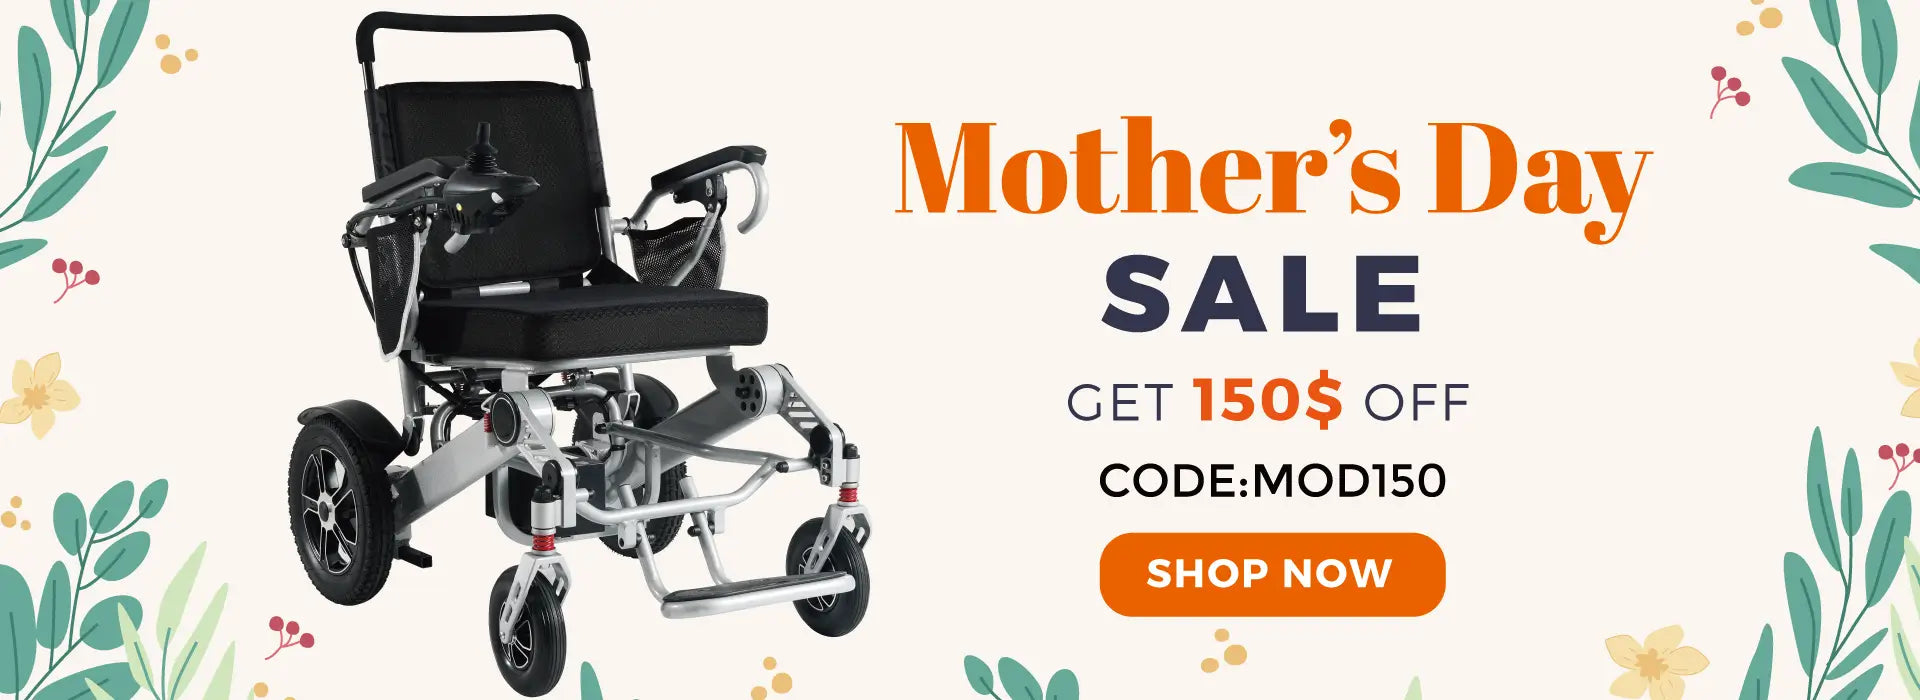 SOULOUT_Mother_s_Day_Sale